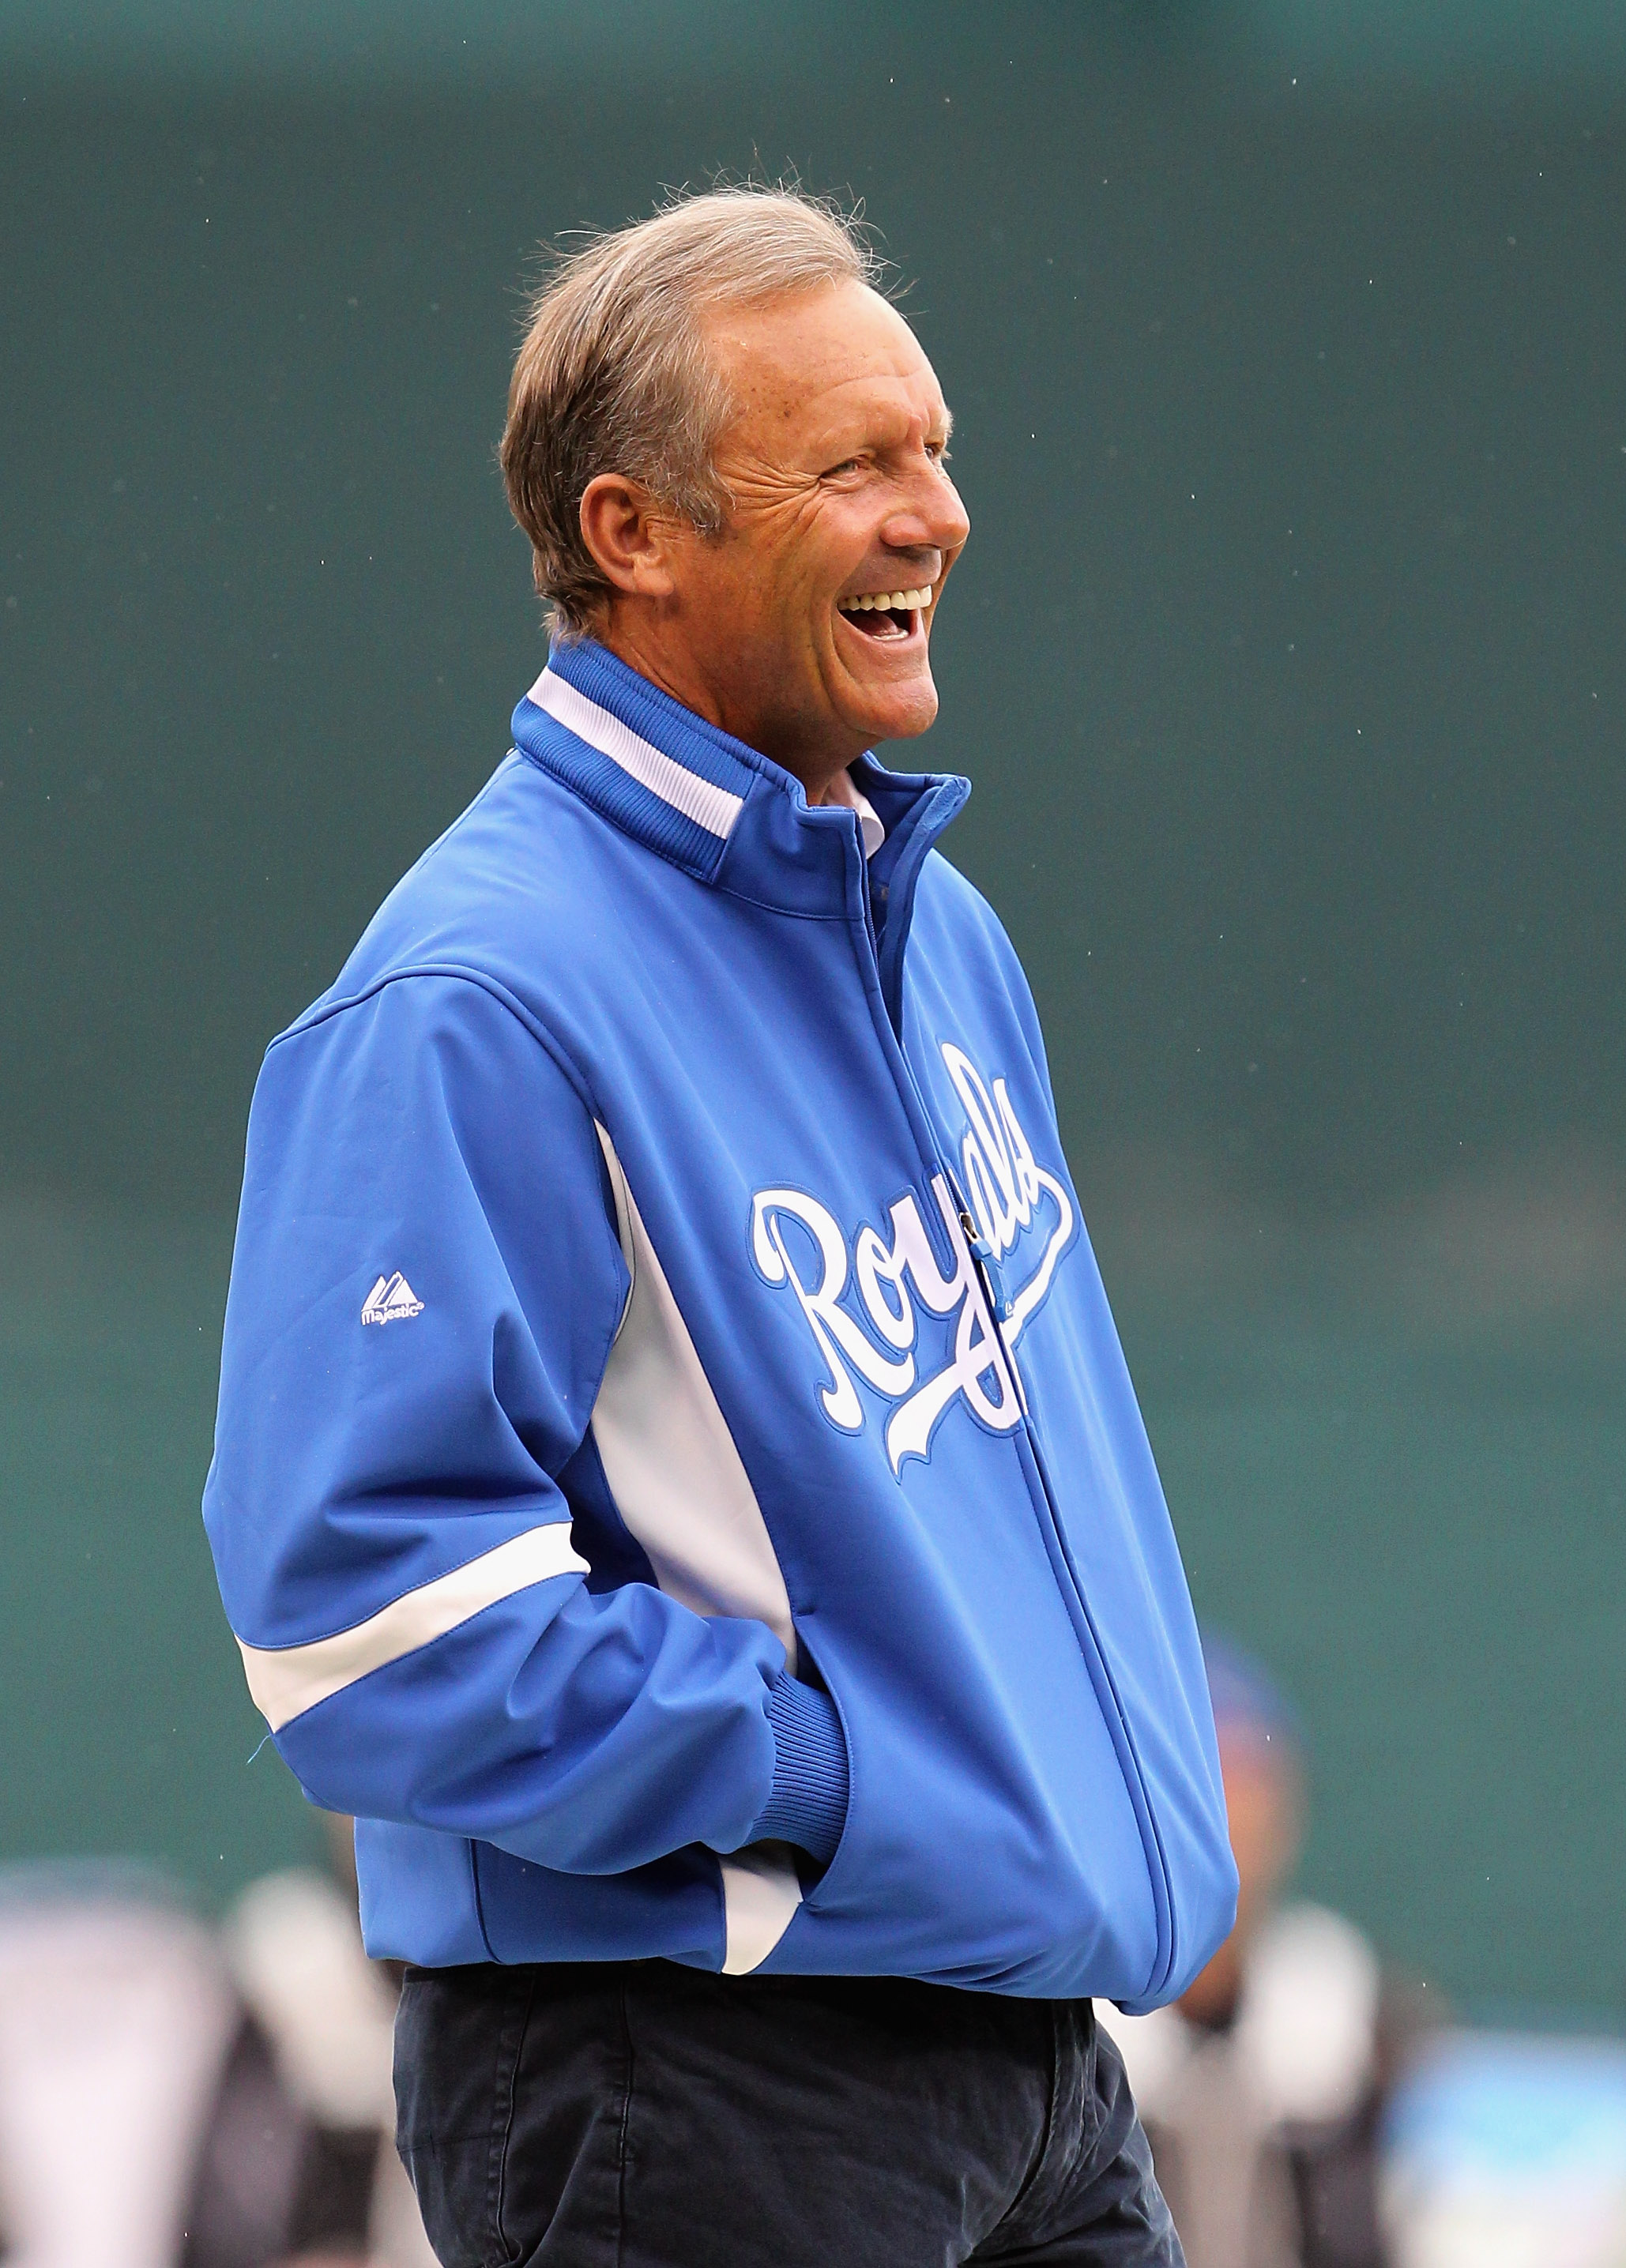 KANSAS CITY, MO - MARCH 31:  Former player George Brett of the Kansas City Royals smiles as he is honored prior to the start of the opening day game against the Los Angeles Angels of Anaheim at Kauffman Stadium on March 31, 2011 in Kansas City, Missouri.